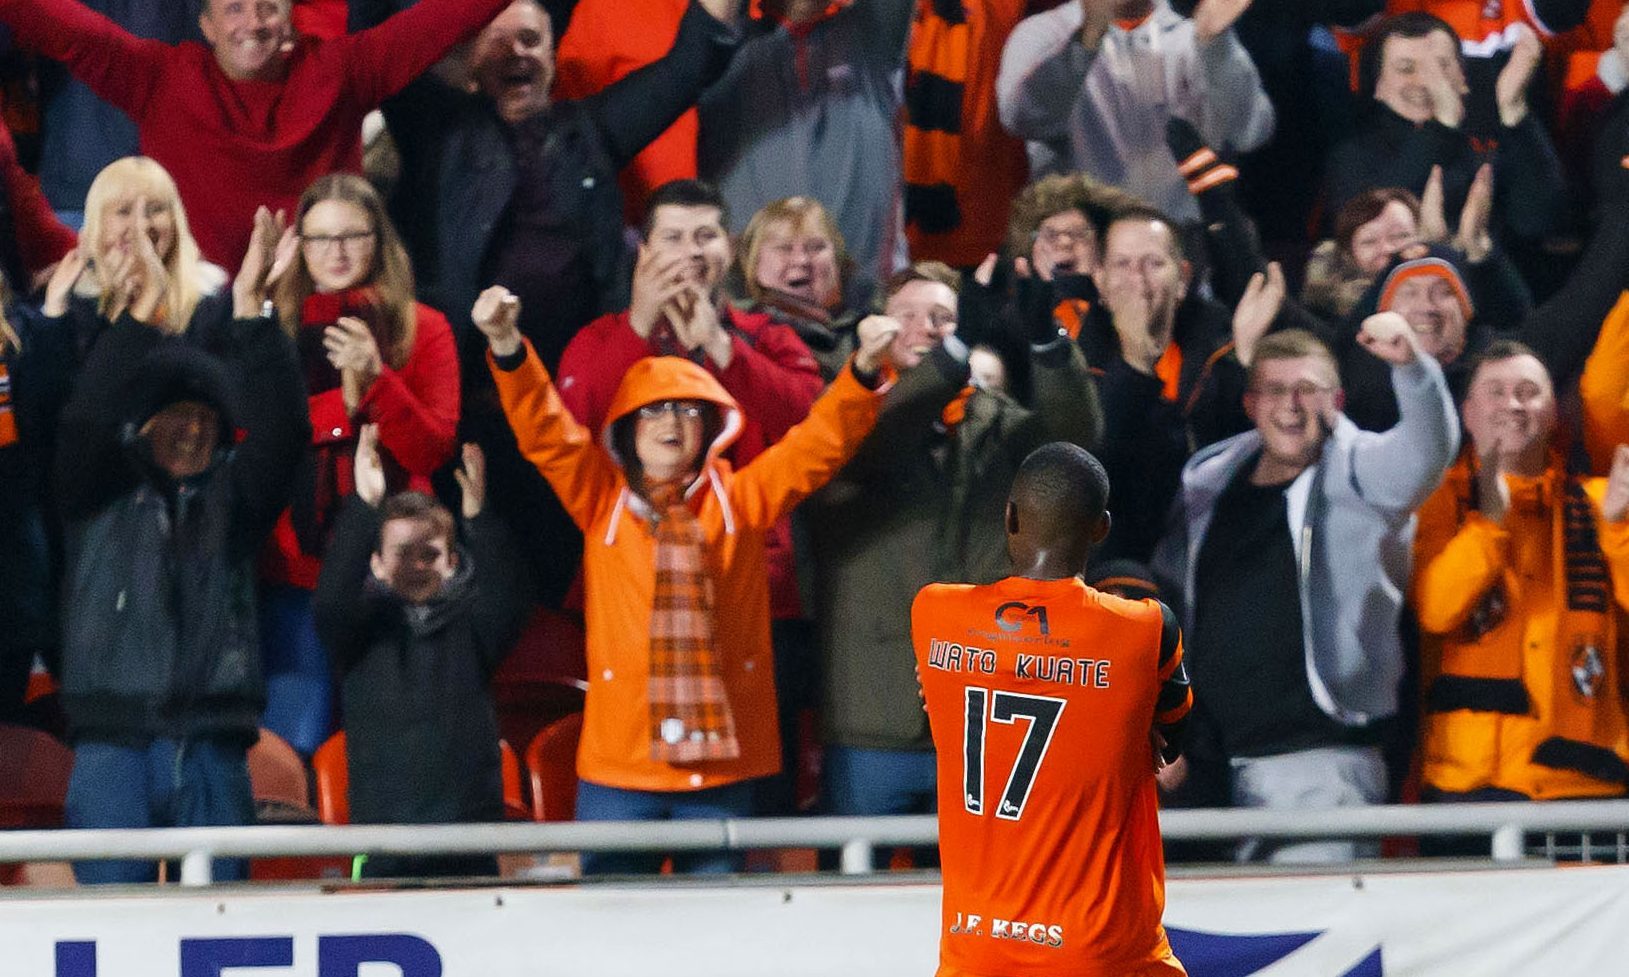 Wato Kuate celebrates his goal with the fans.